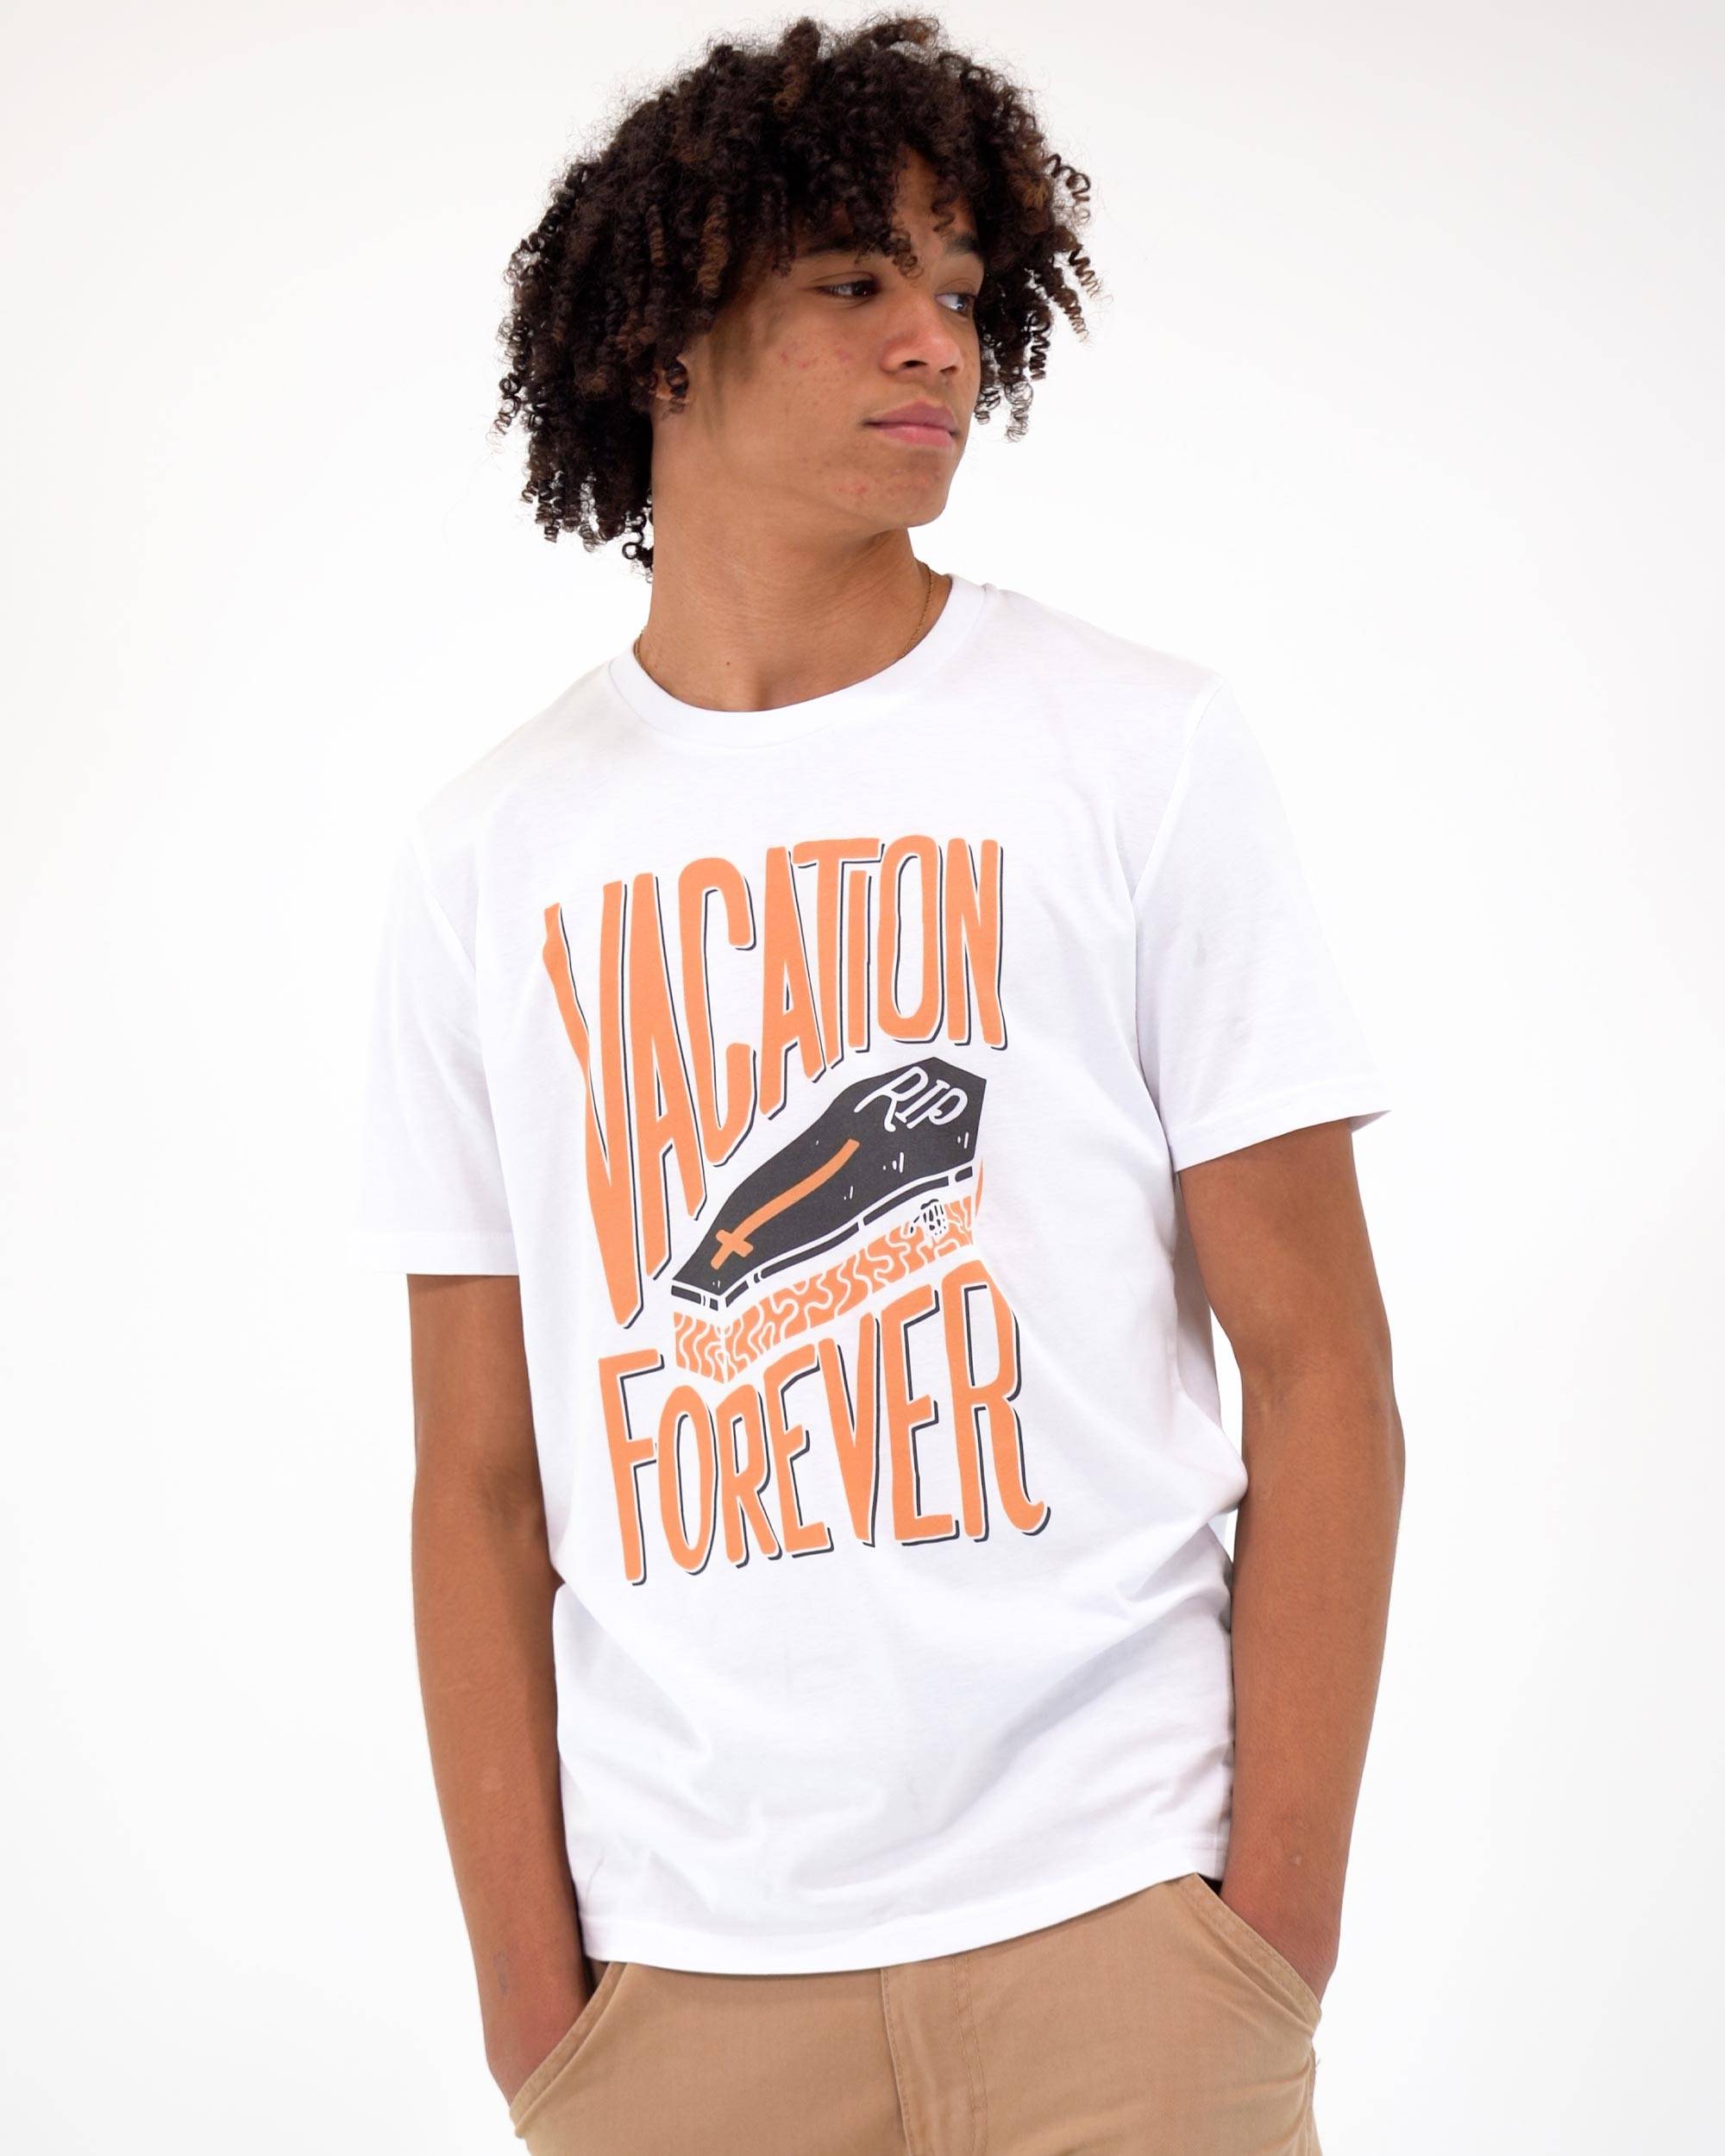 T-shirt Vacation Forever Grafitee